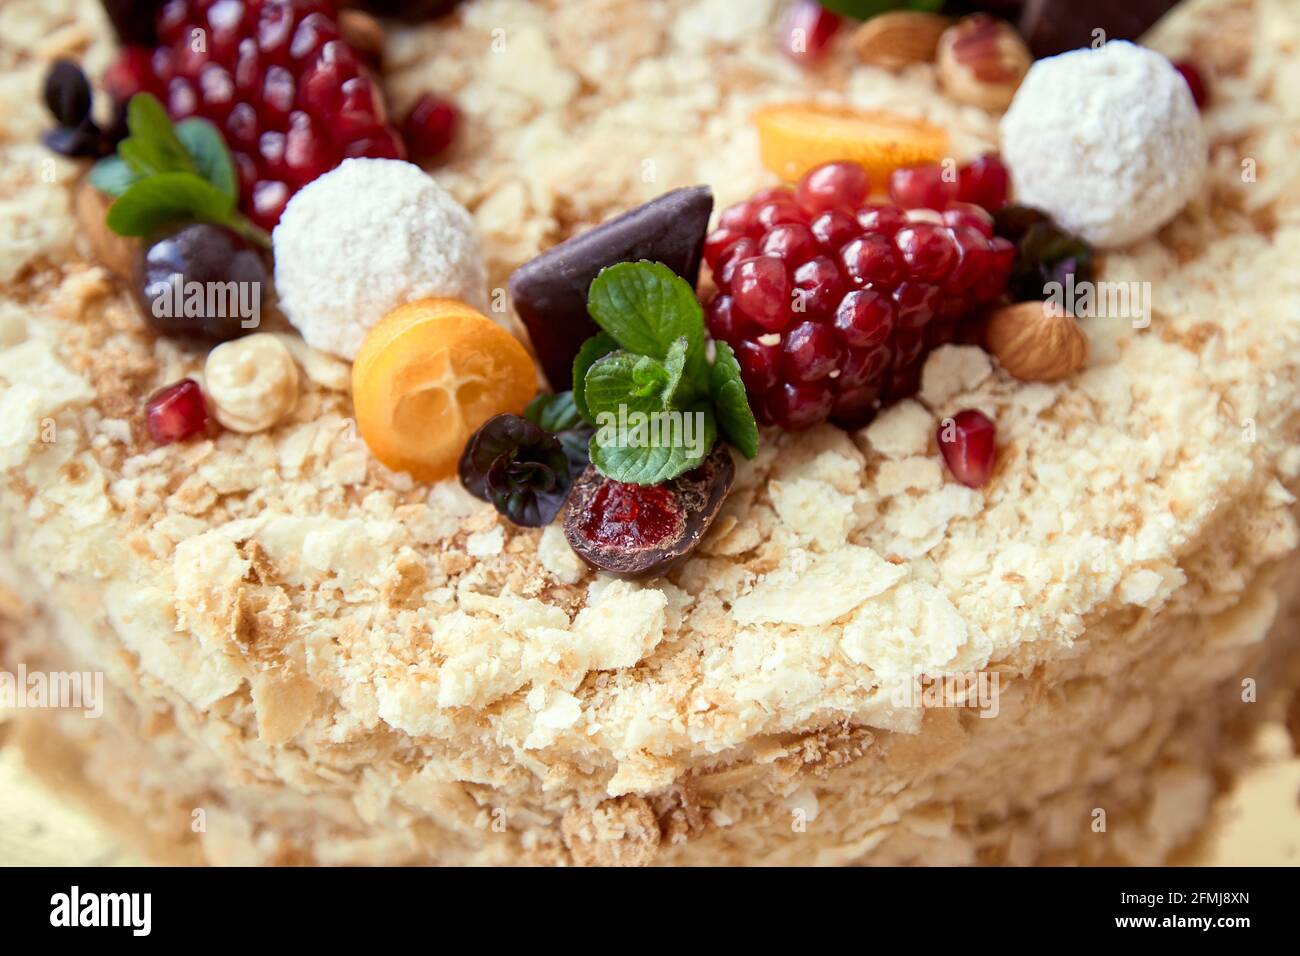 Top view of bright, homemade honey cake with fruits and sweets Stock Photo